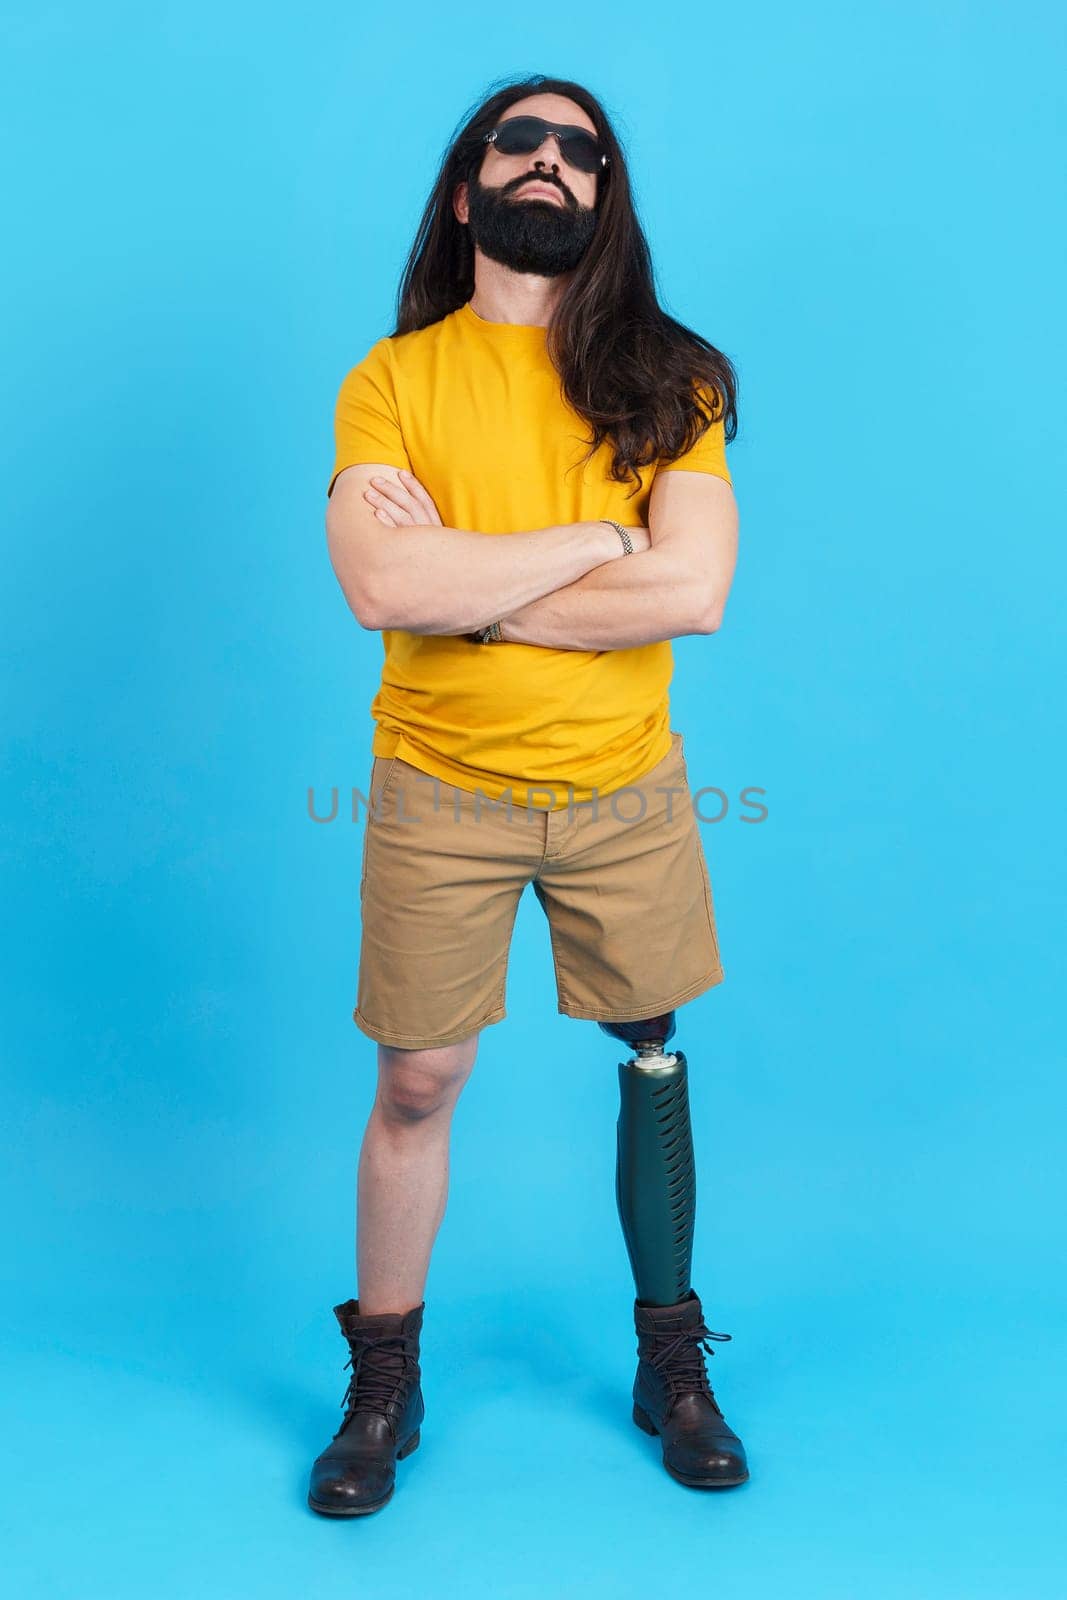 Vertical studio portrait with blue background of a man with long hair and sunglasses standing with a prosthetic leg